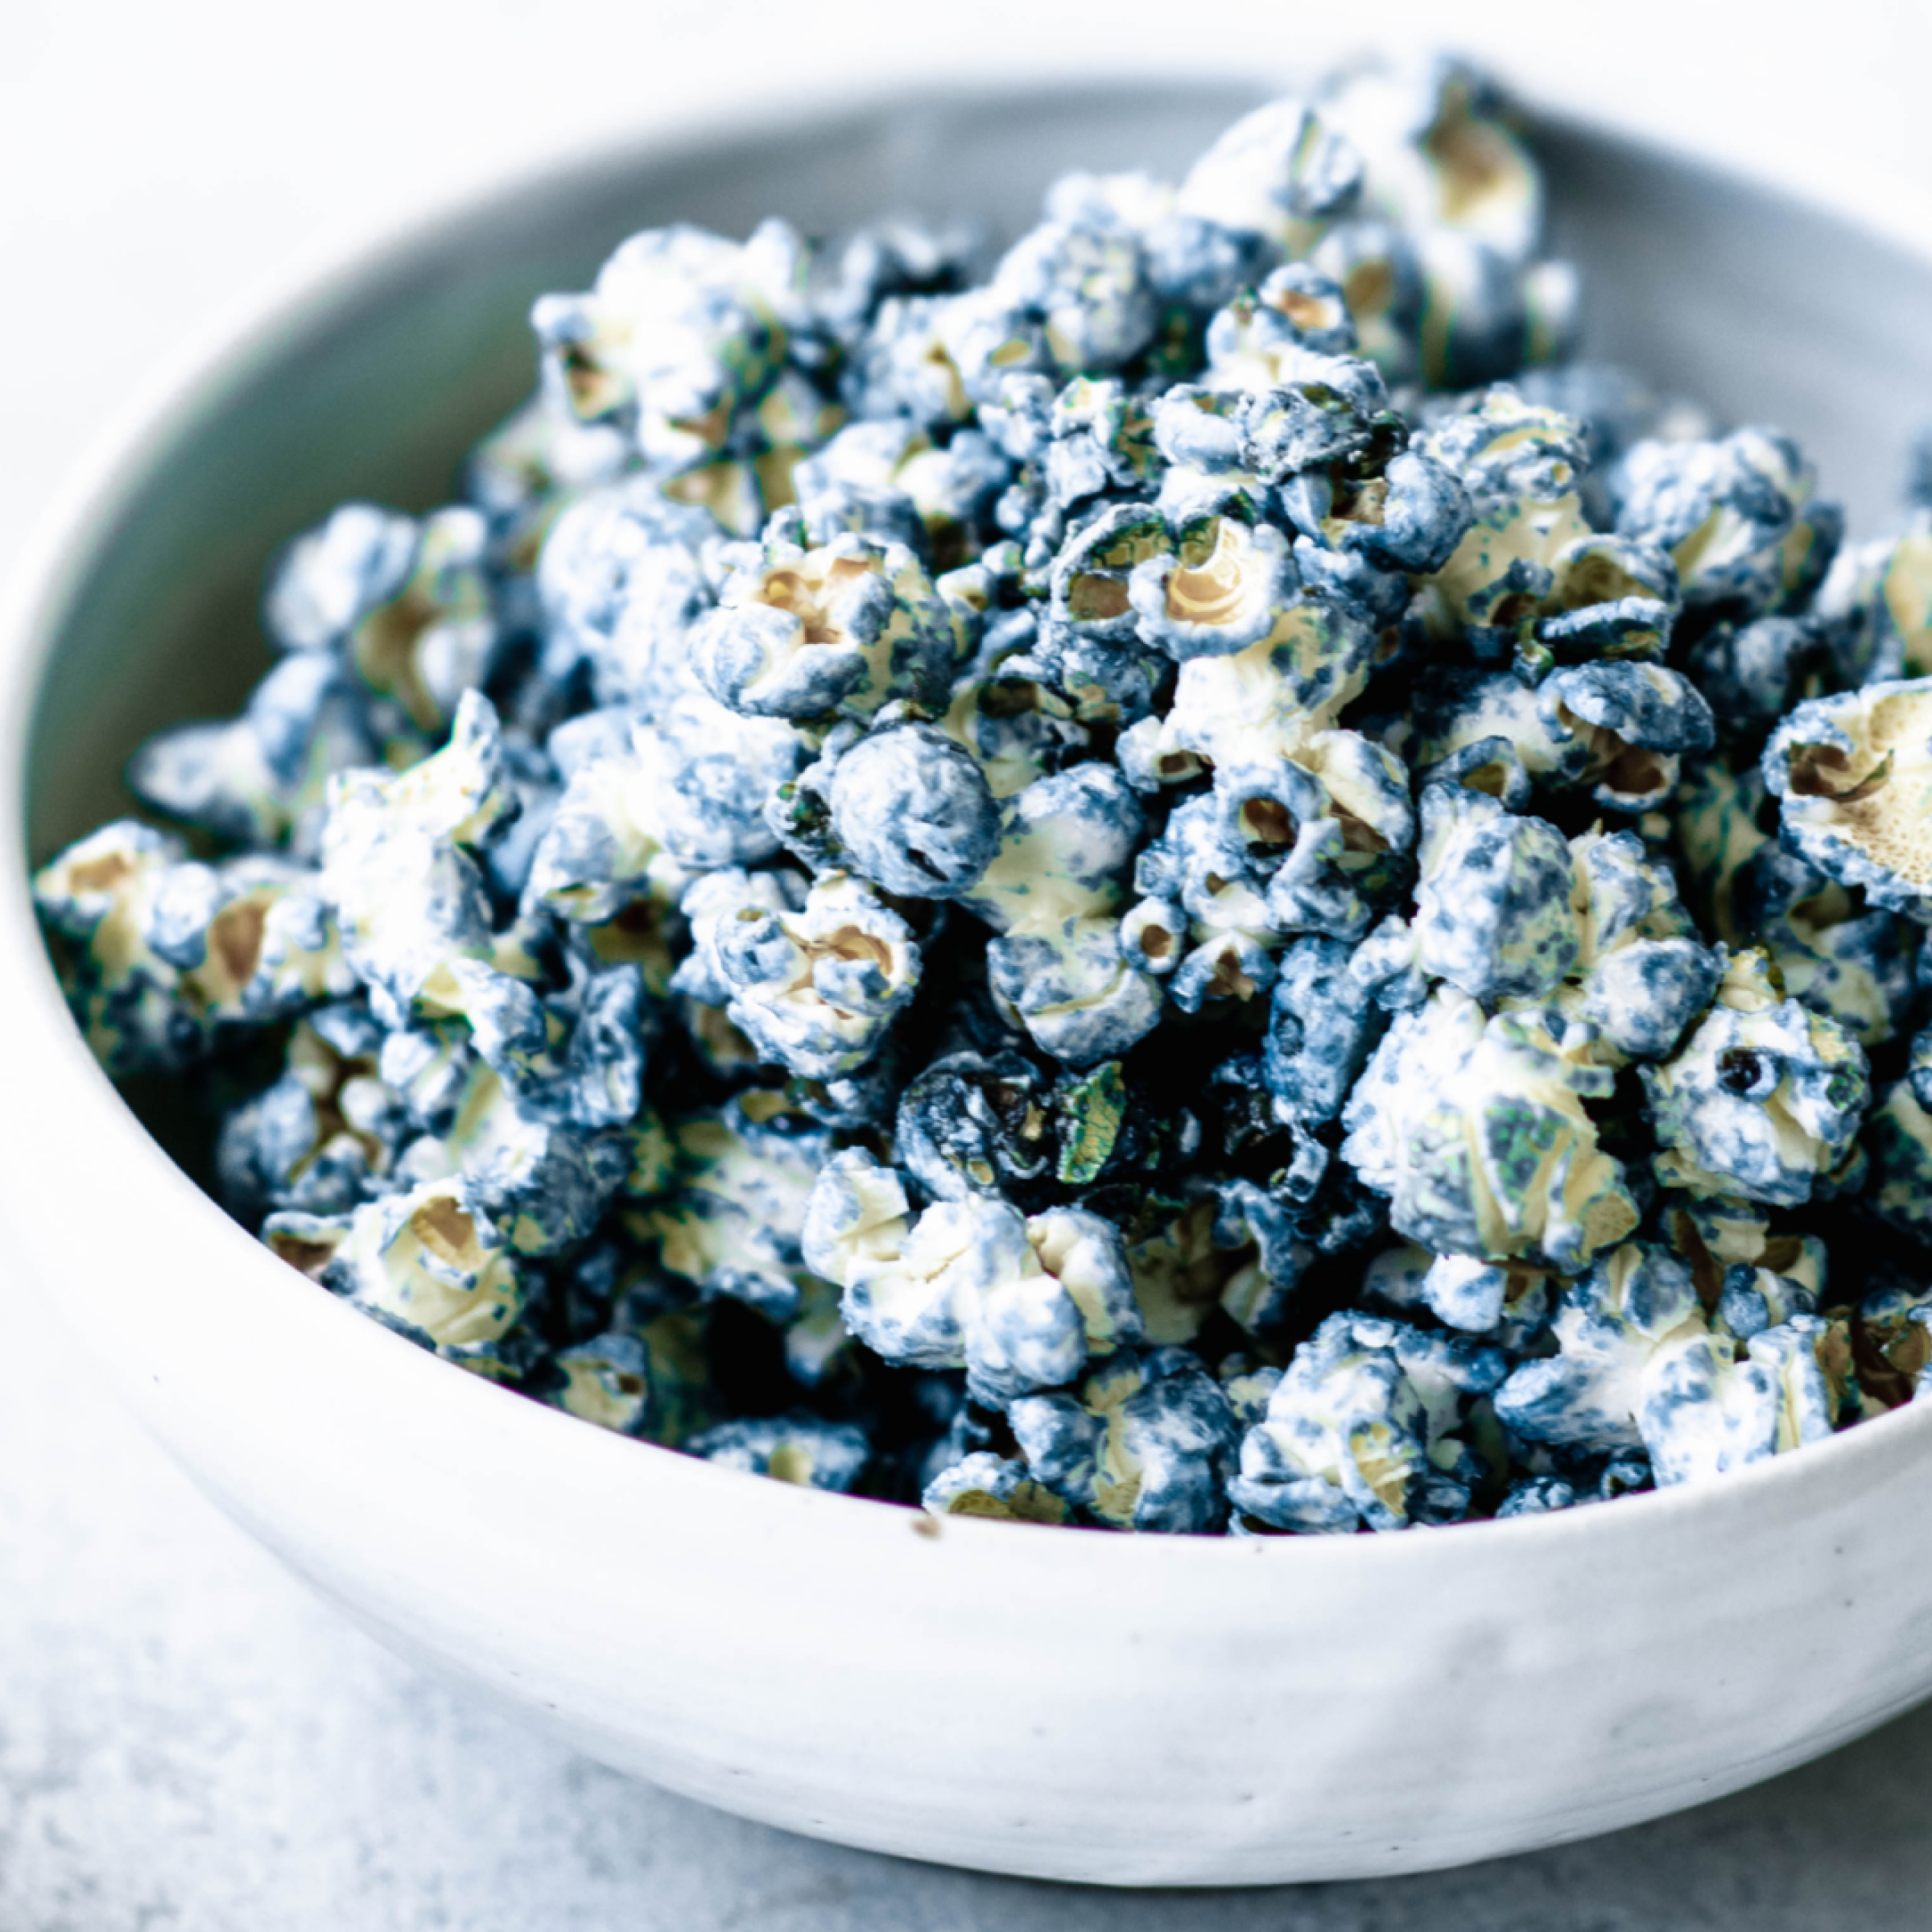 Blue popcorn colored naturally, having a balance of sweet and salty flavors, made healthily with Almond Cow's vegan butter